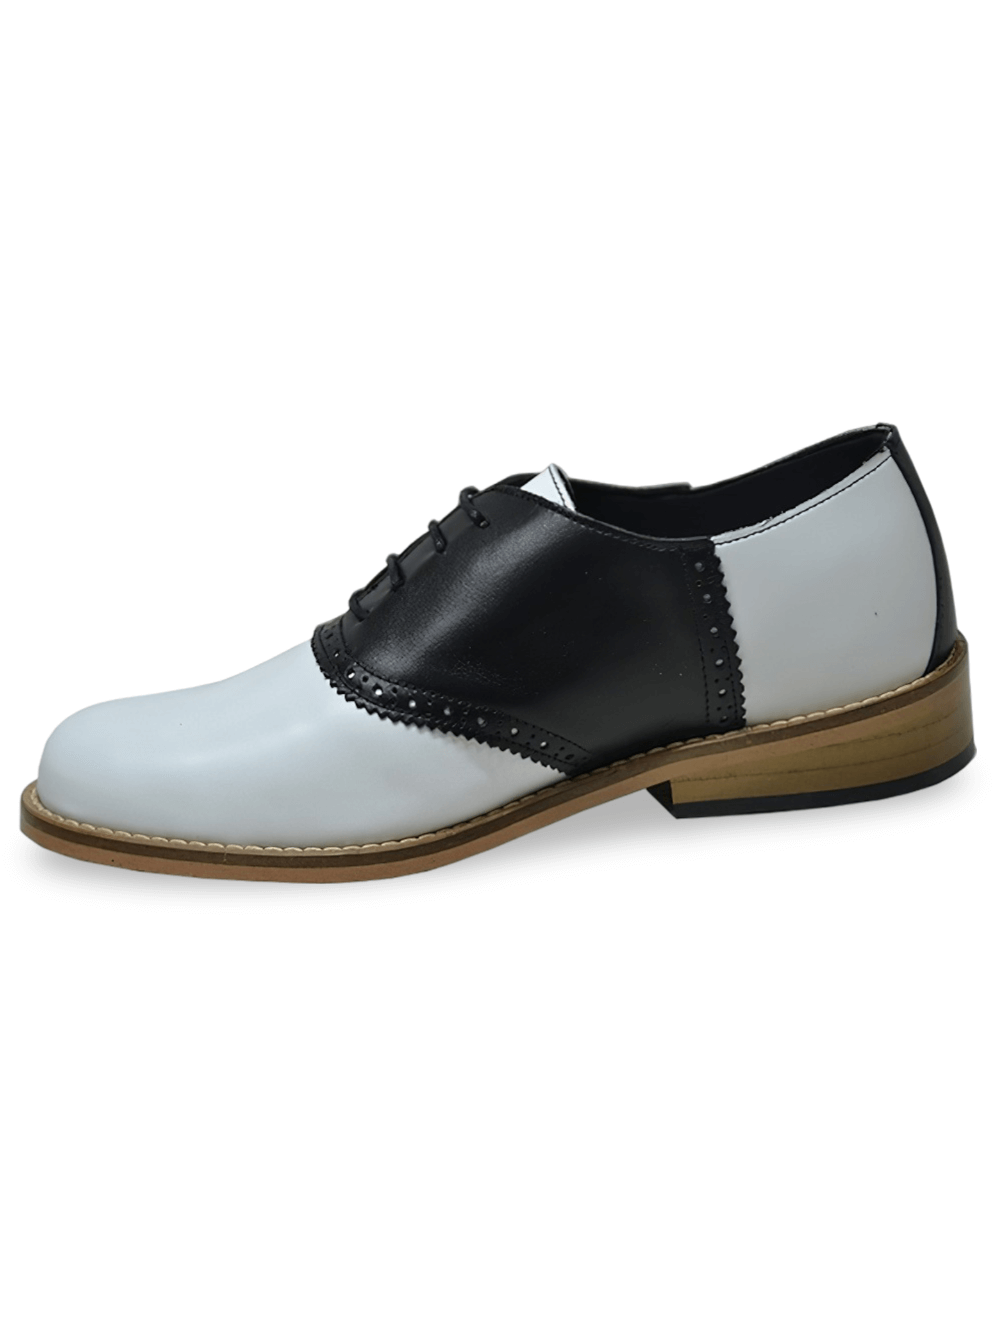 Unisex Lace-Up Flat Bowling Shoes in Grained Leather